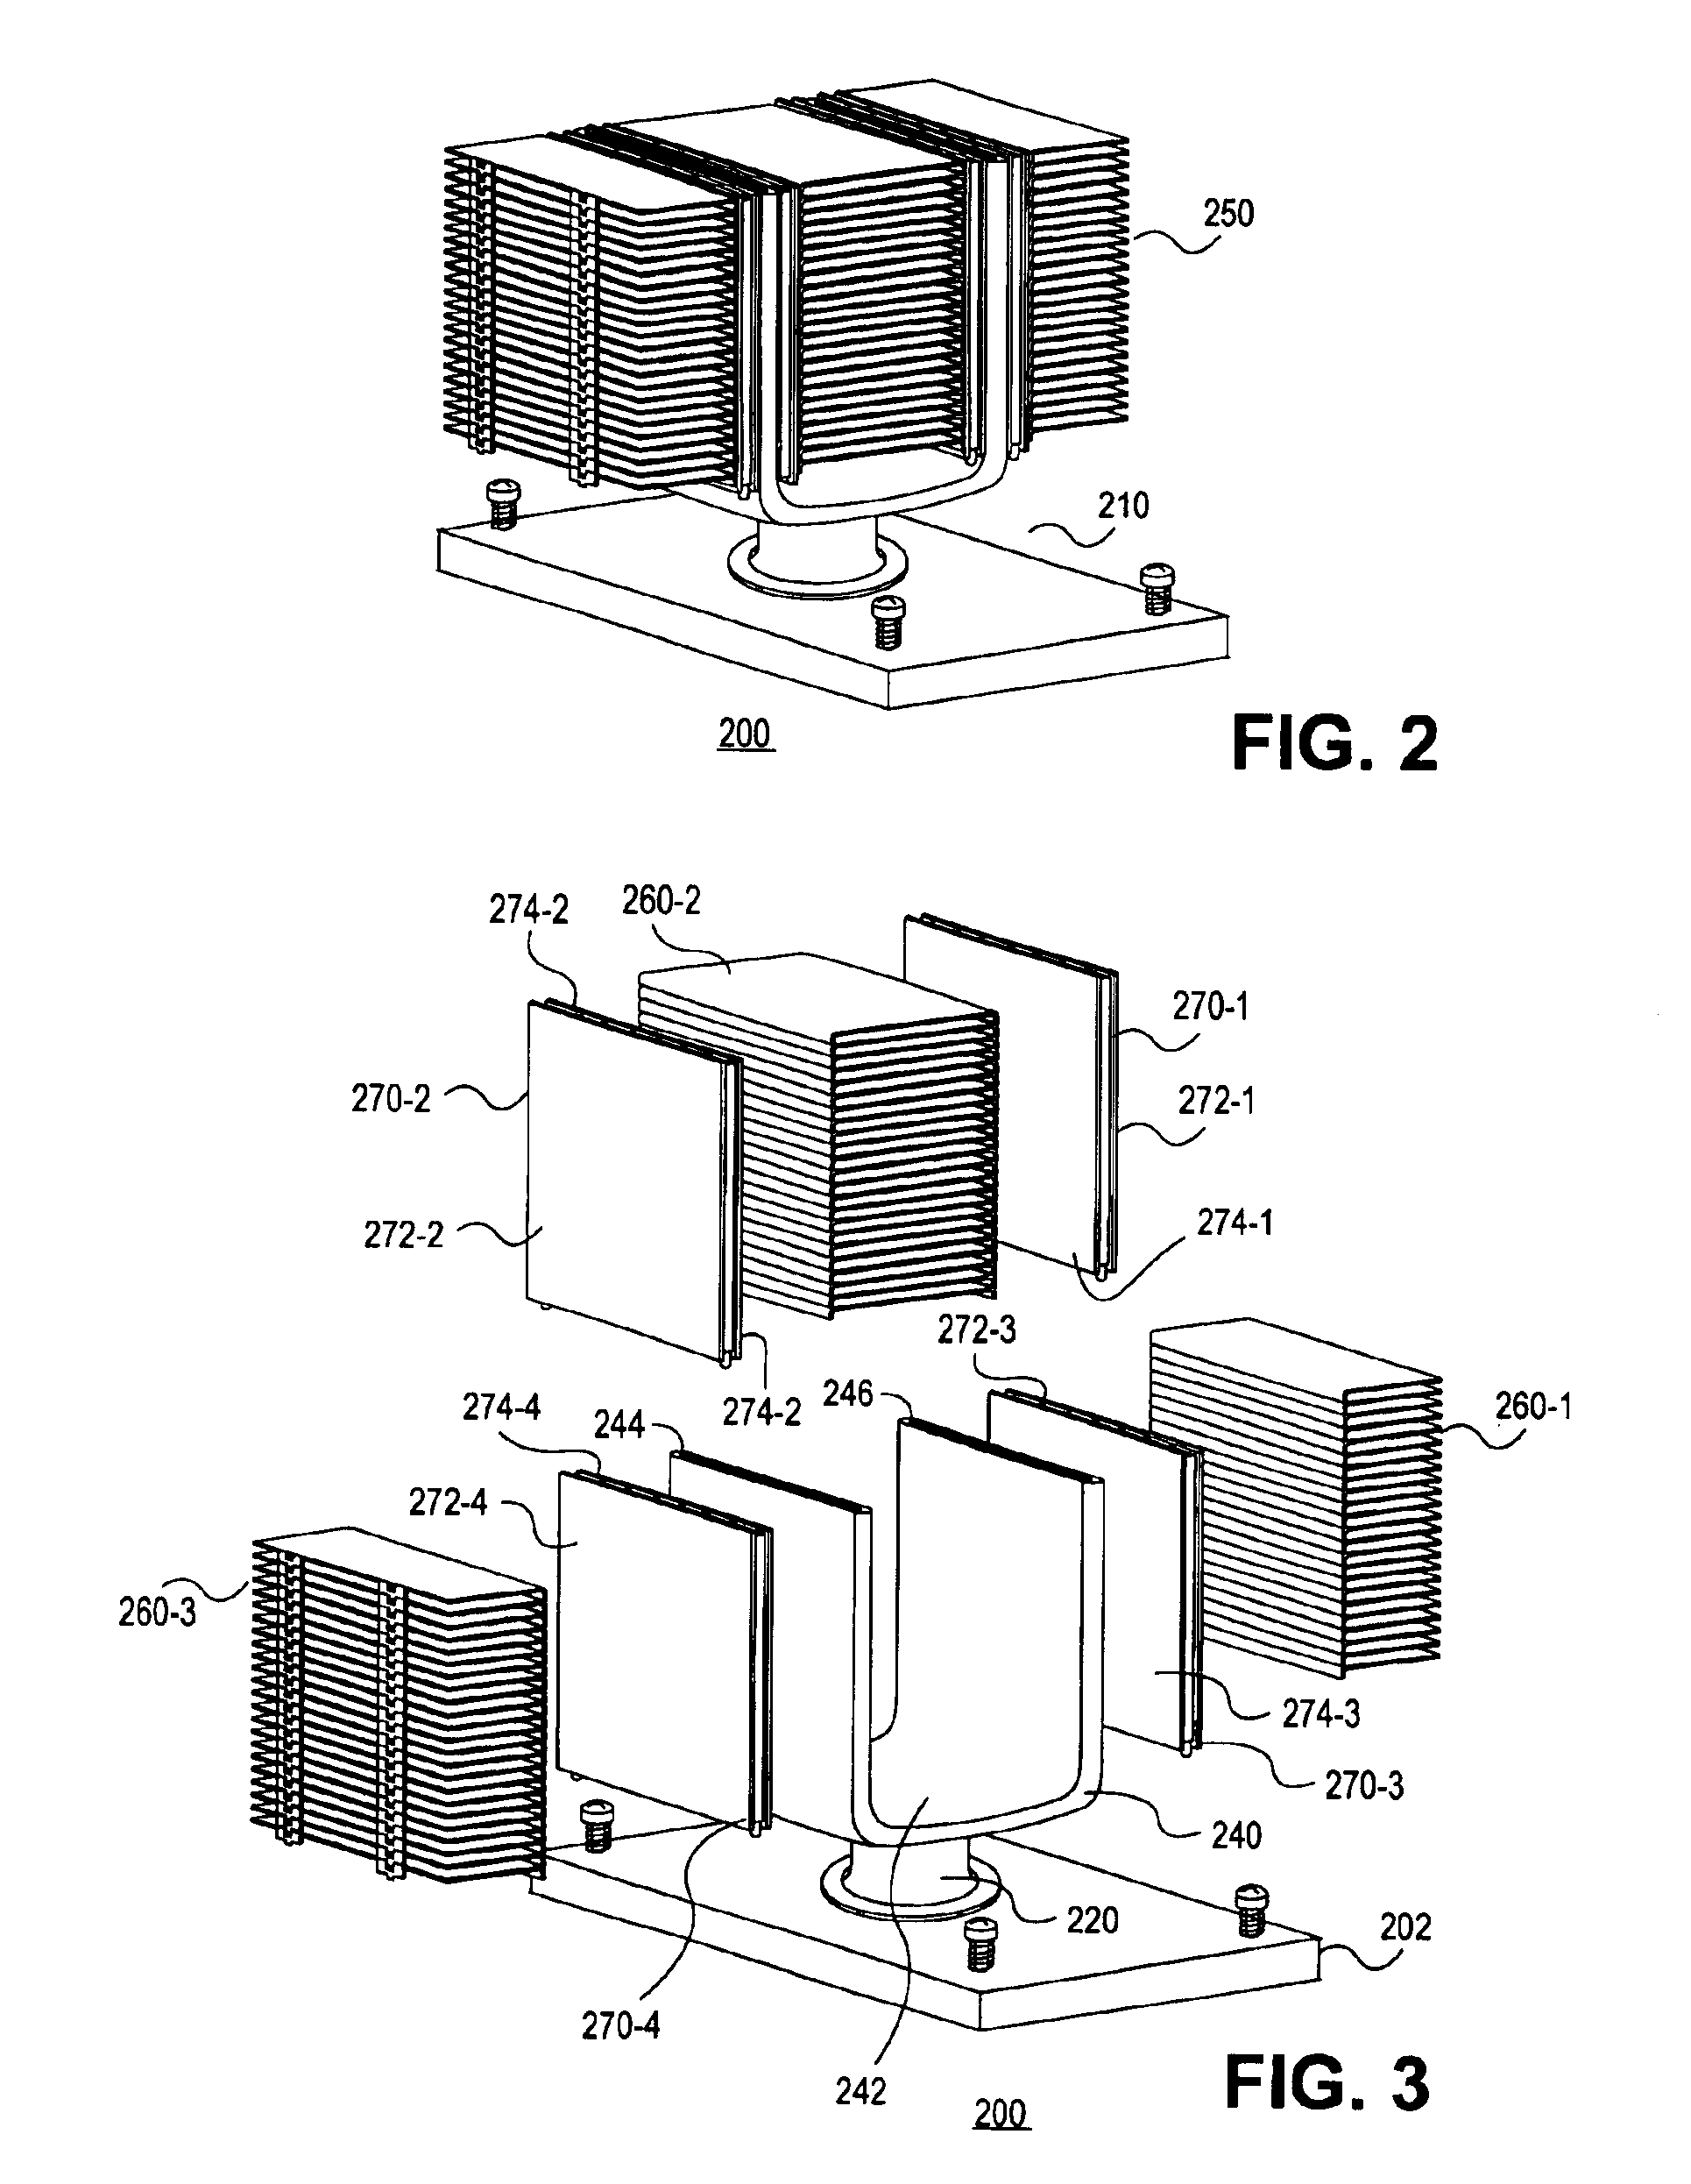 Apparatus and method for cooling integrated circuit devices